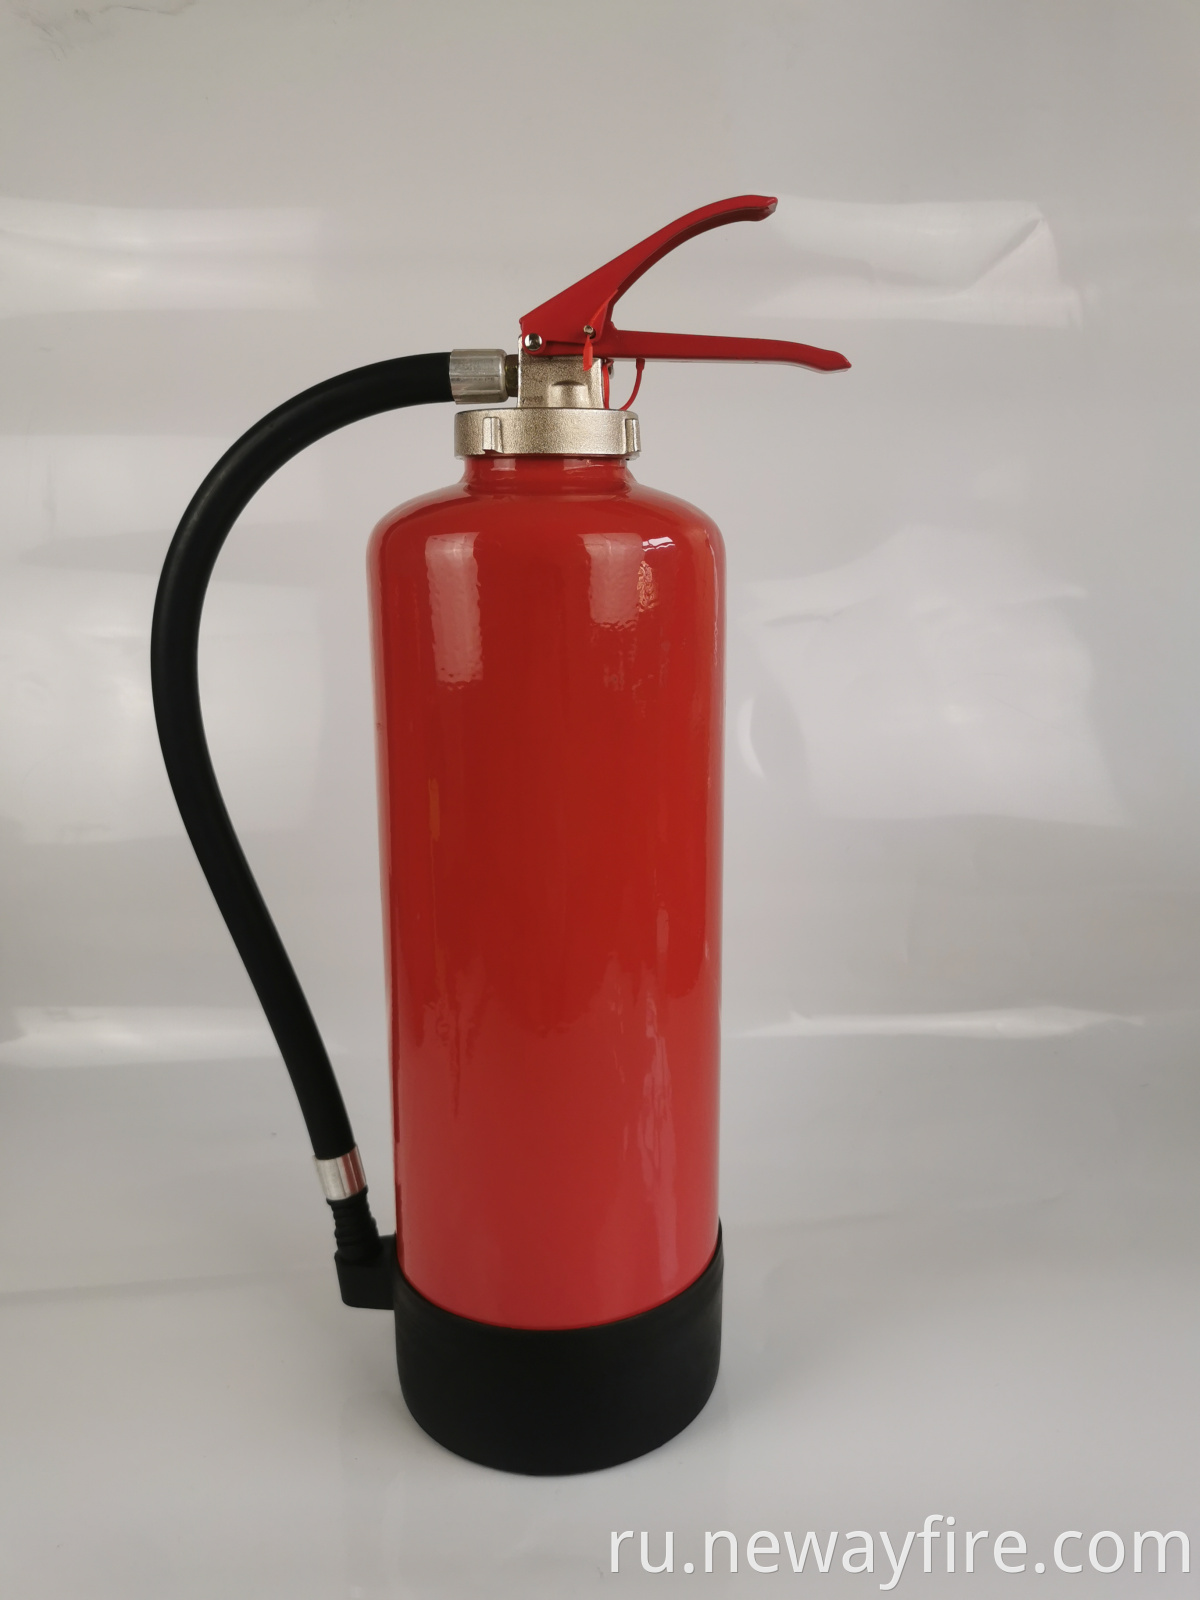 9Kg Built-in portable dry powder fire extinguisher